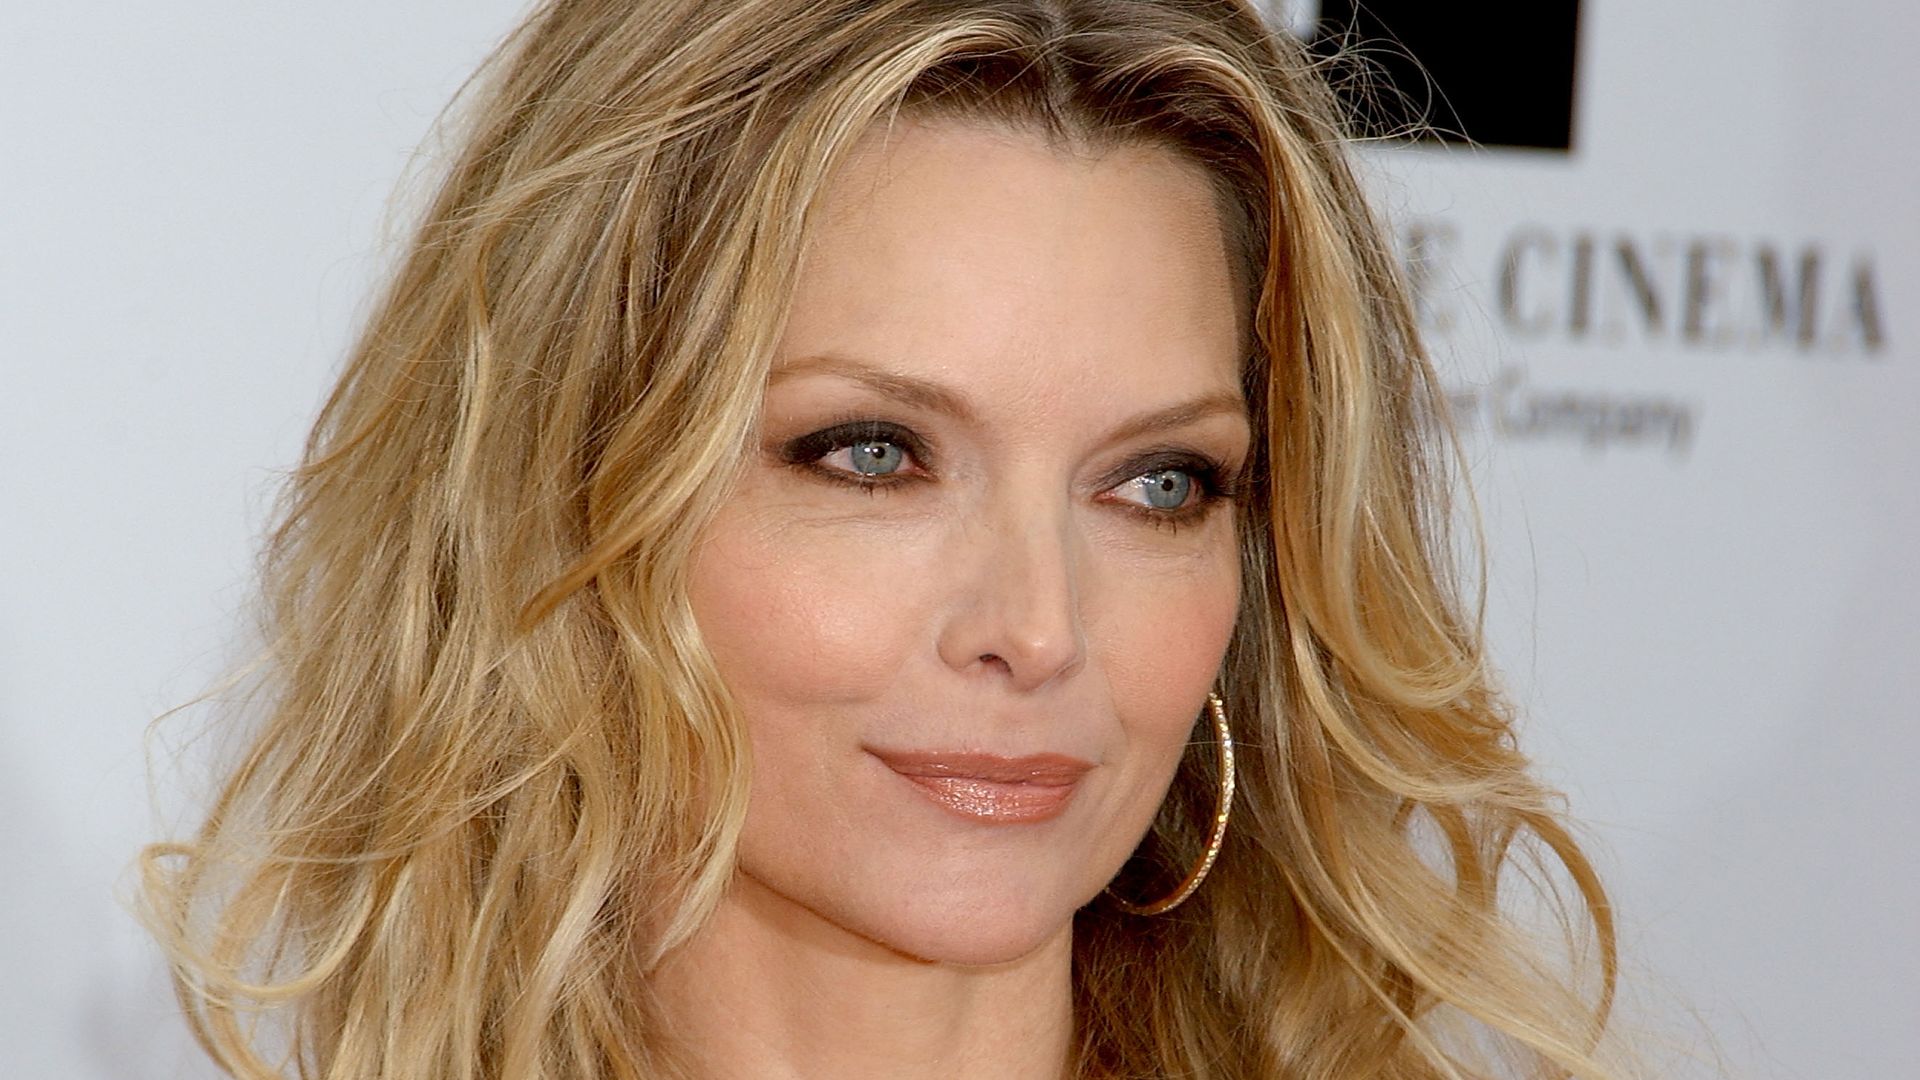 Michelle Pfeiffer's DIY makeover at 66 highlights all natural beauty ...